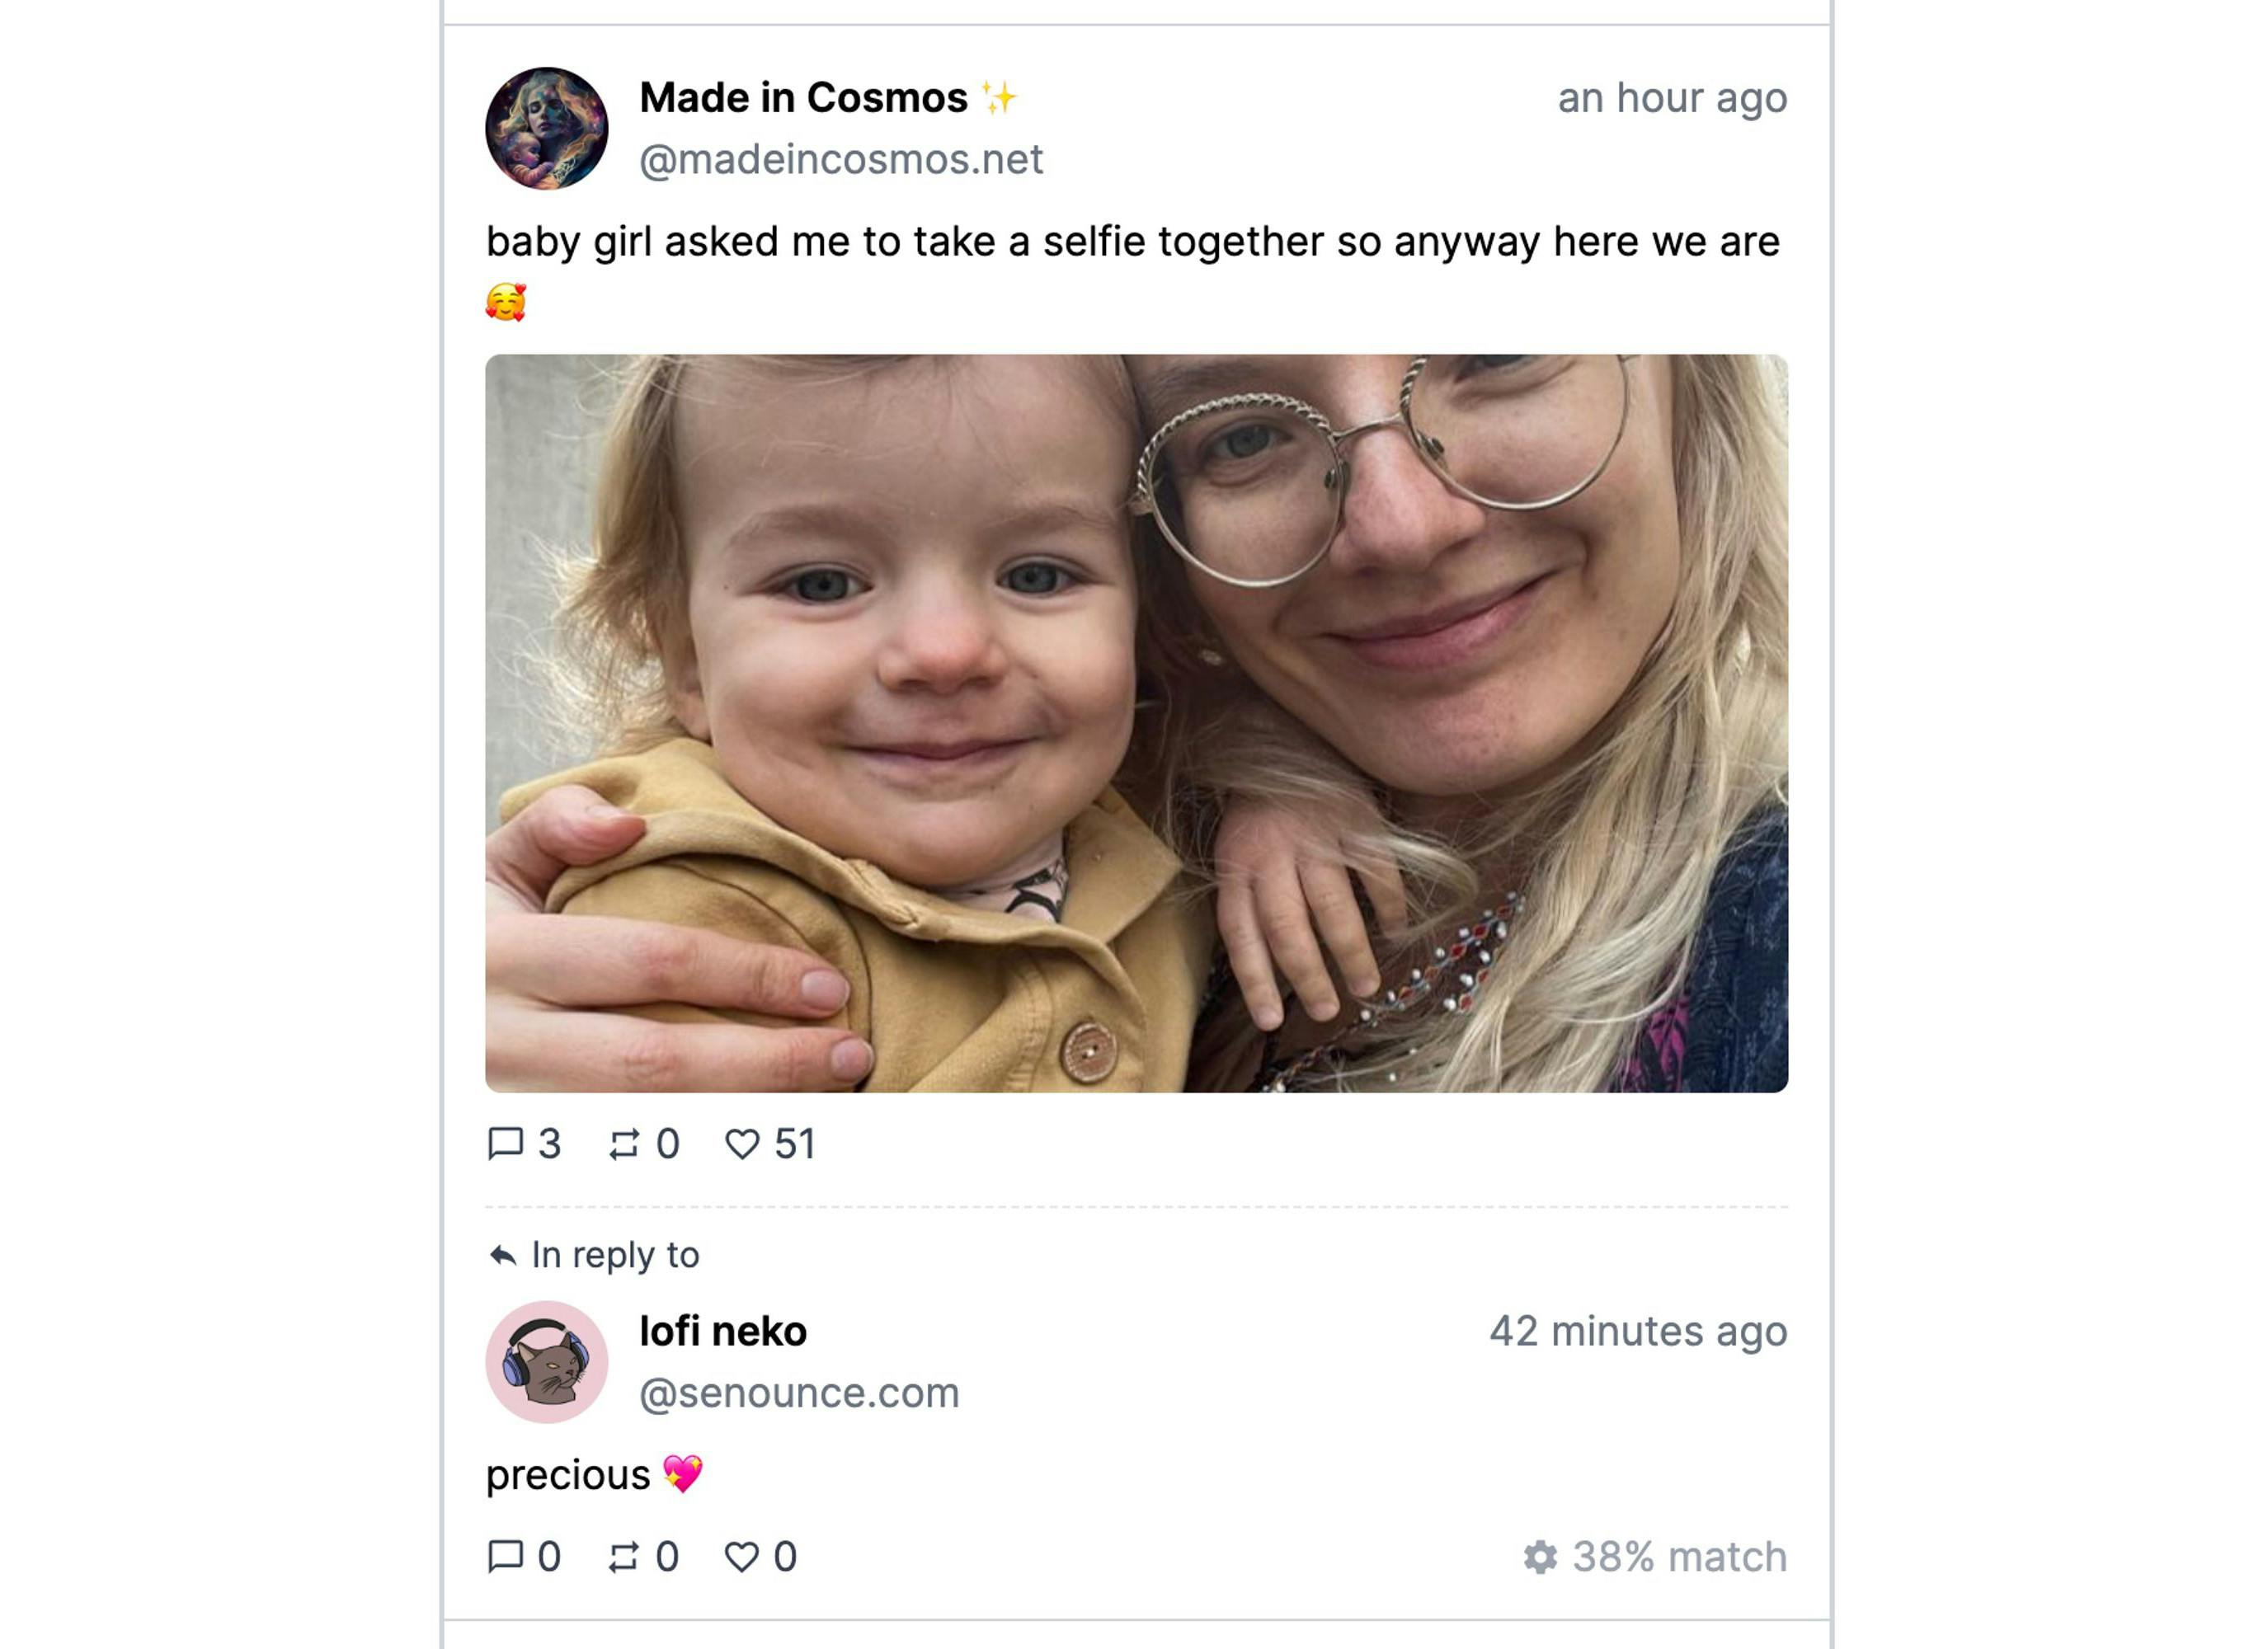 a screenshot of a really wholesome post on Bluesky, showing Made in Cosmos posting a selfie with her daugter + a comment saying "precious 💖"